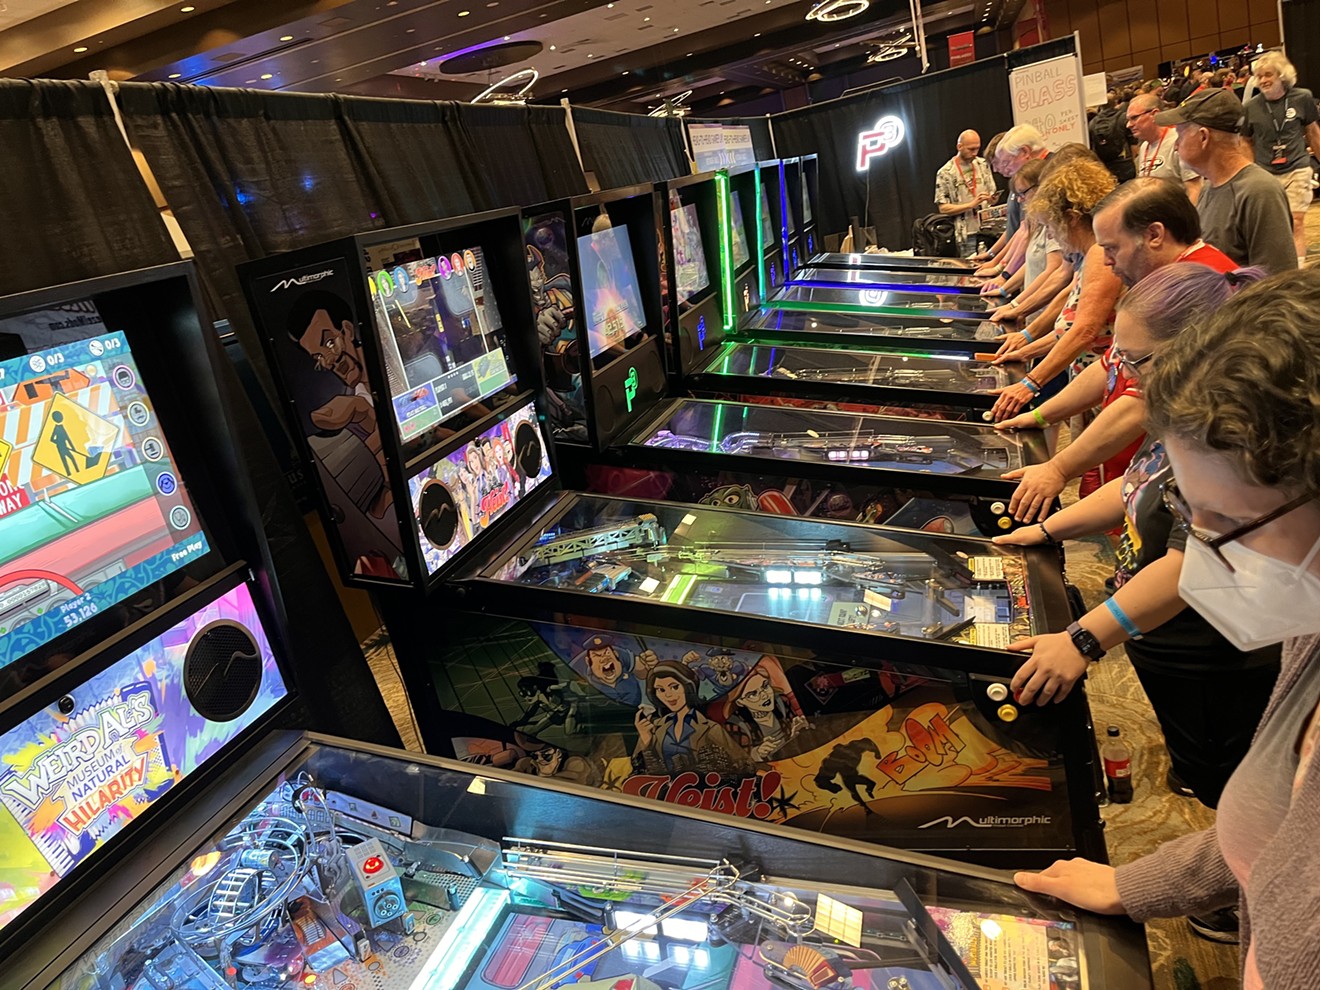 Guests of the Texas Pinball Festival at the Frisco Convention Center test drive some new games from Multimorphic Pinball.